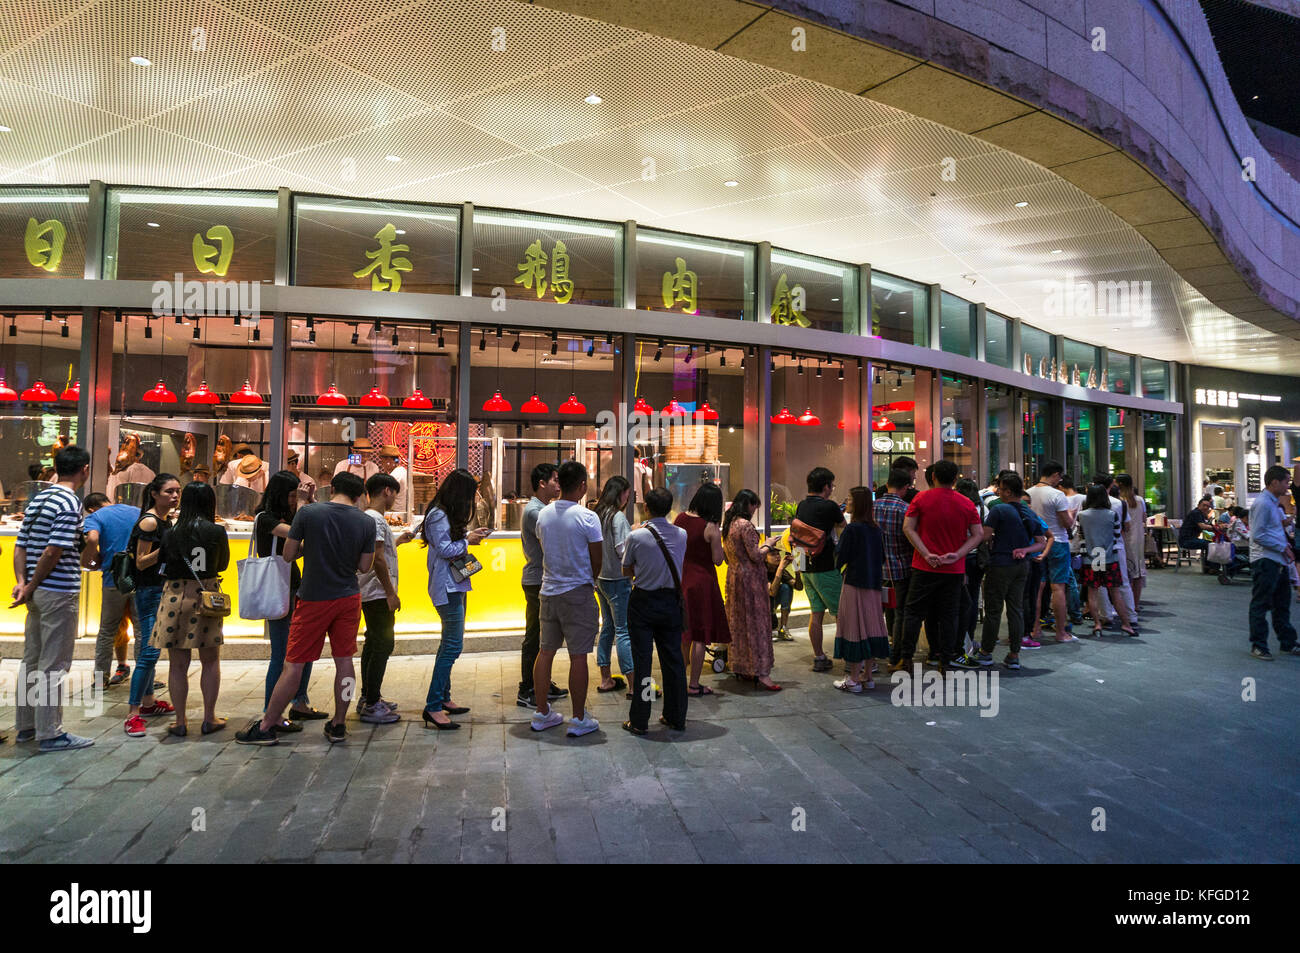 People queuing at a popular restaurant in Shenzhen, Guangdong Province, China Stock Photo